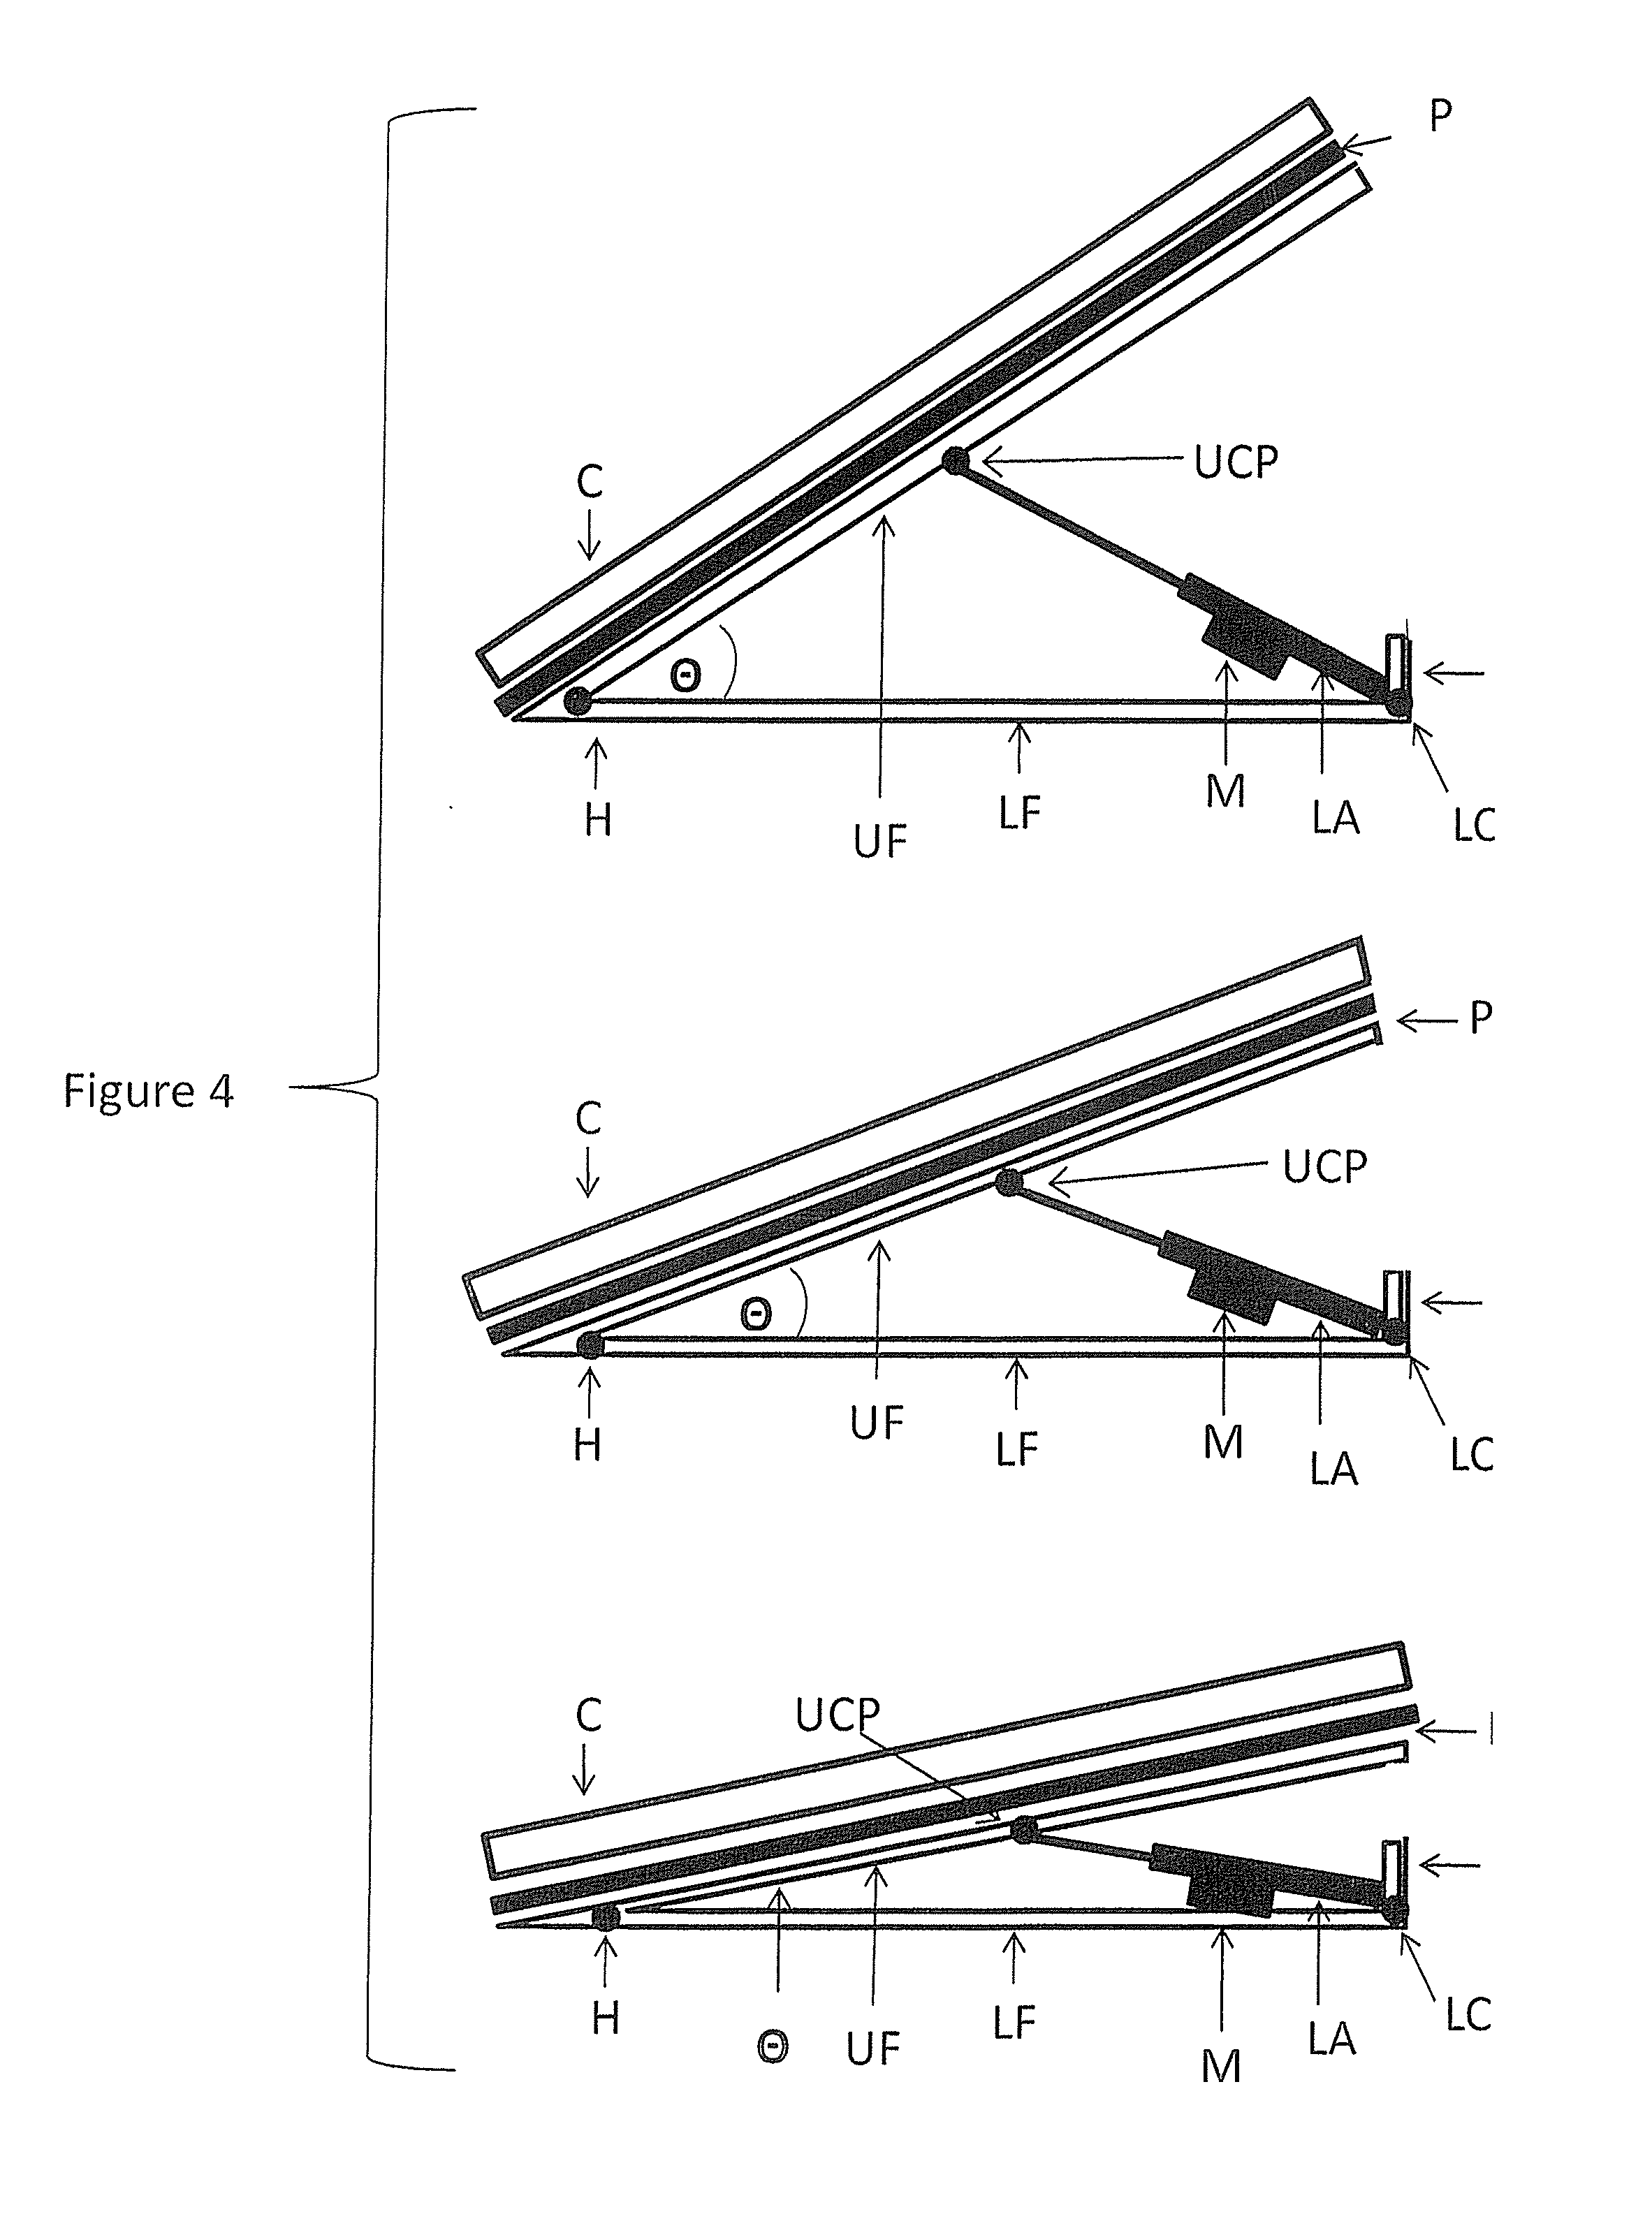 Surface mounted, motorized upper body lift assembly for alleviating discomfort while lying down